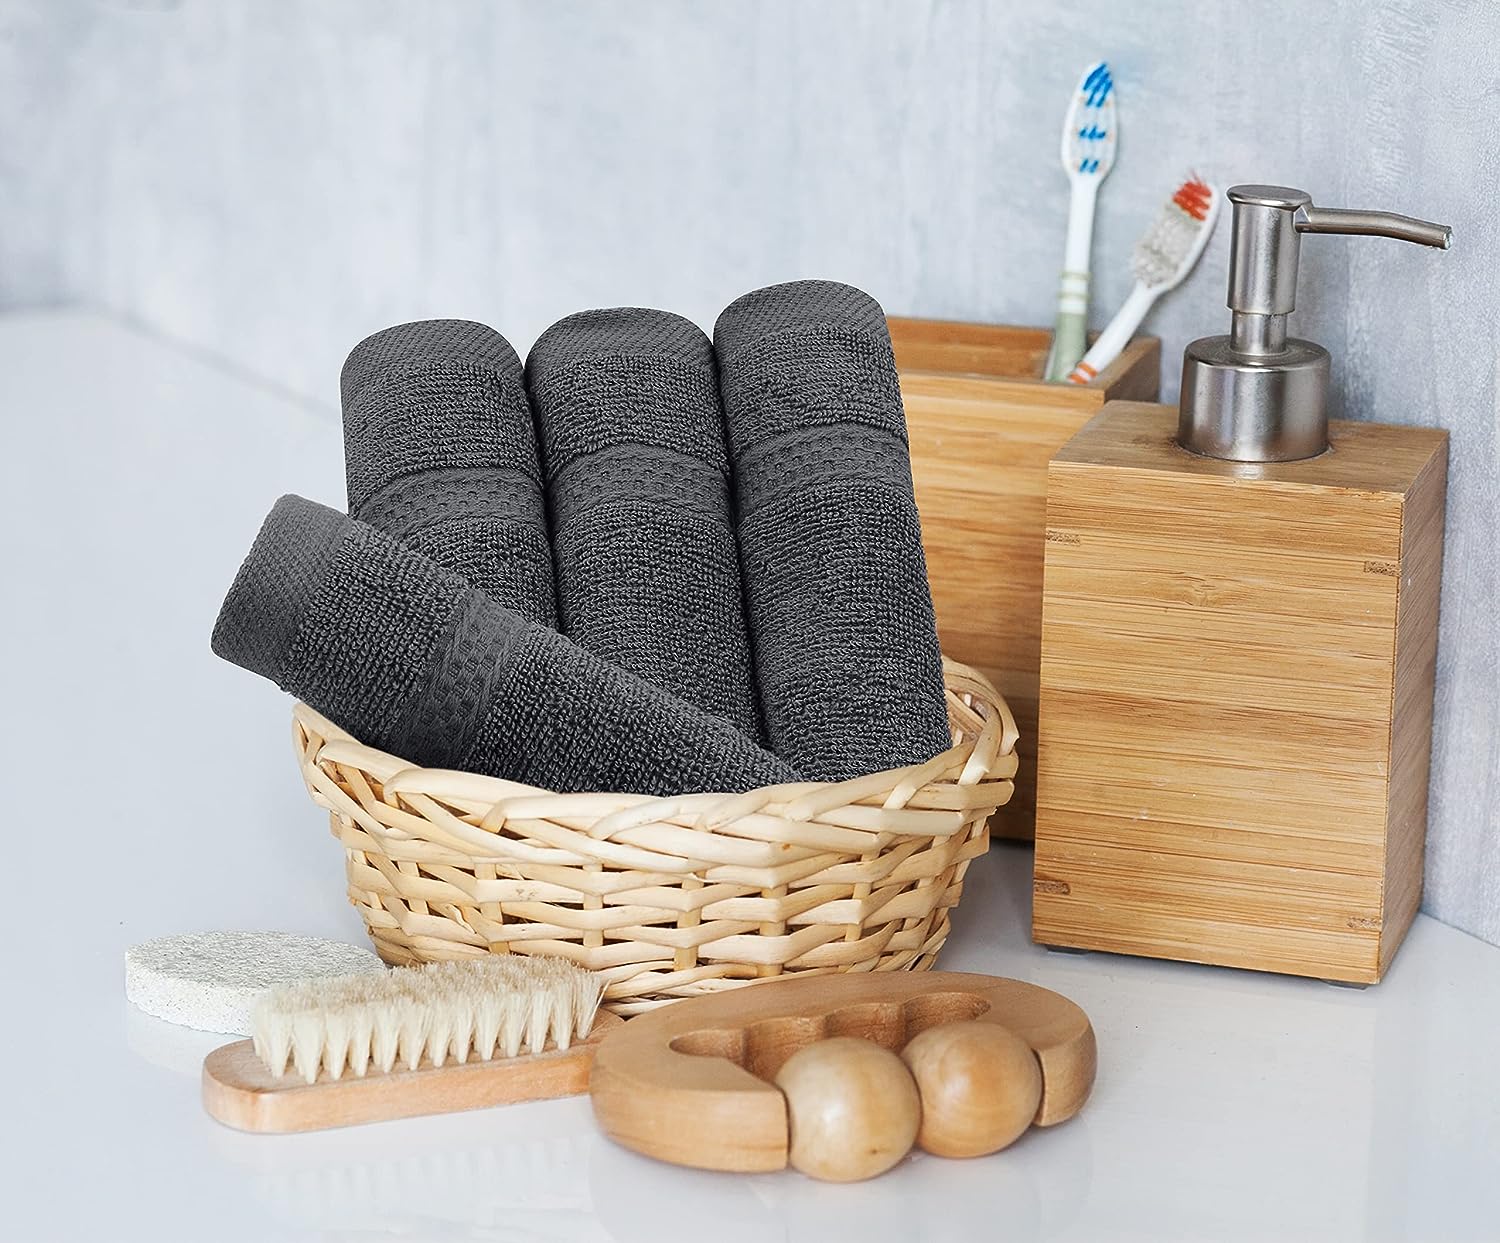 Purchase Delicious bath towel 800 gsm For Amazing Meals 